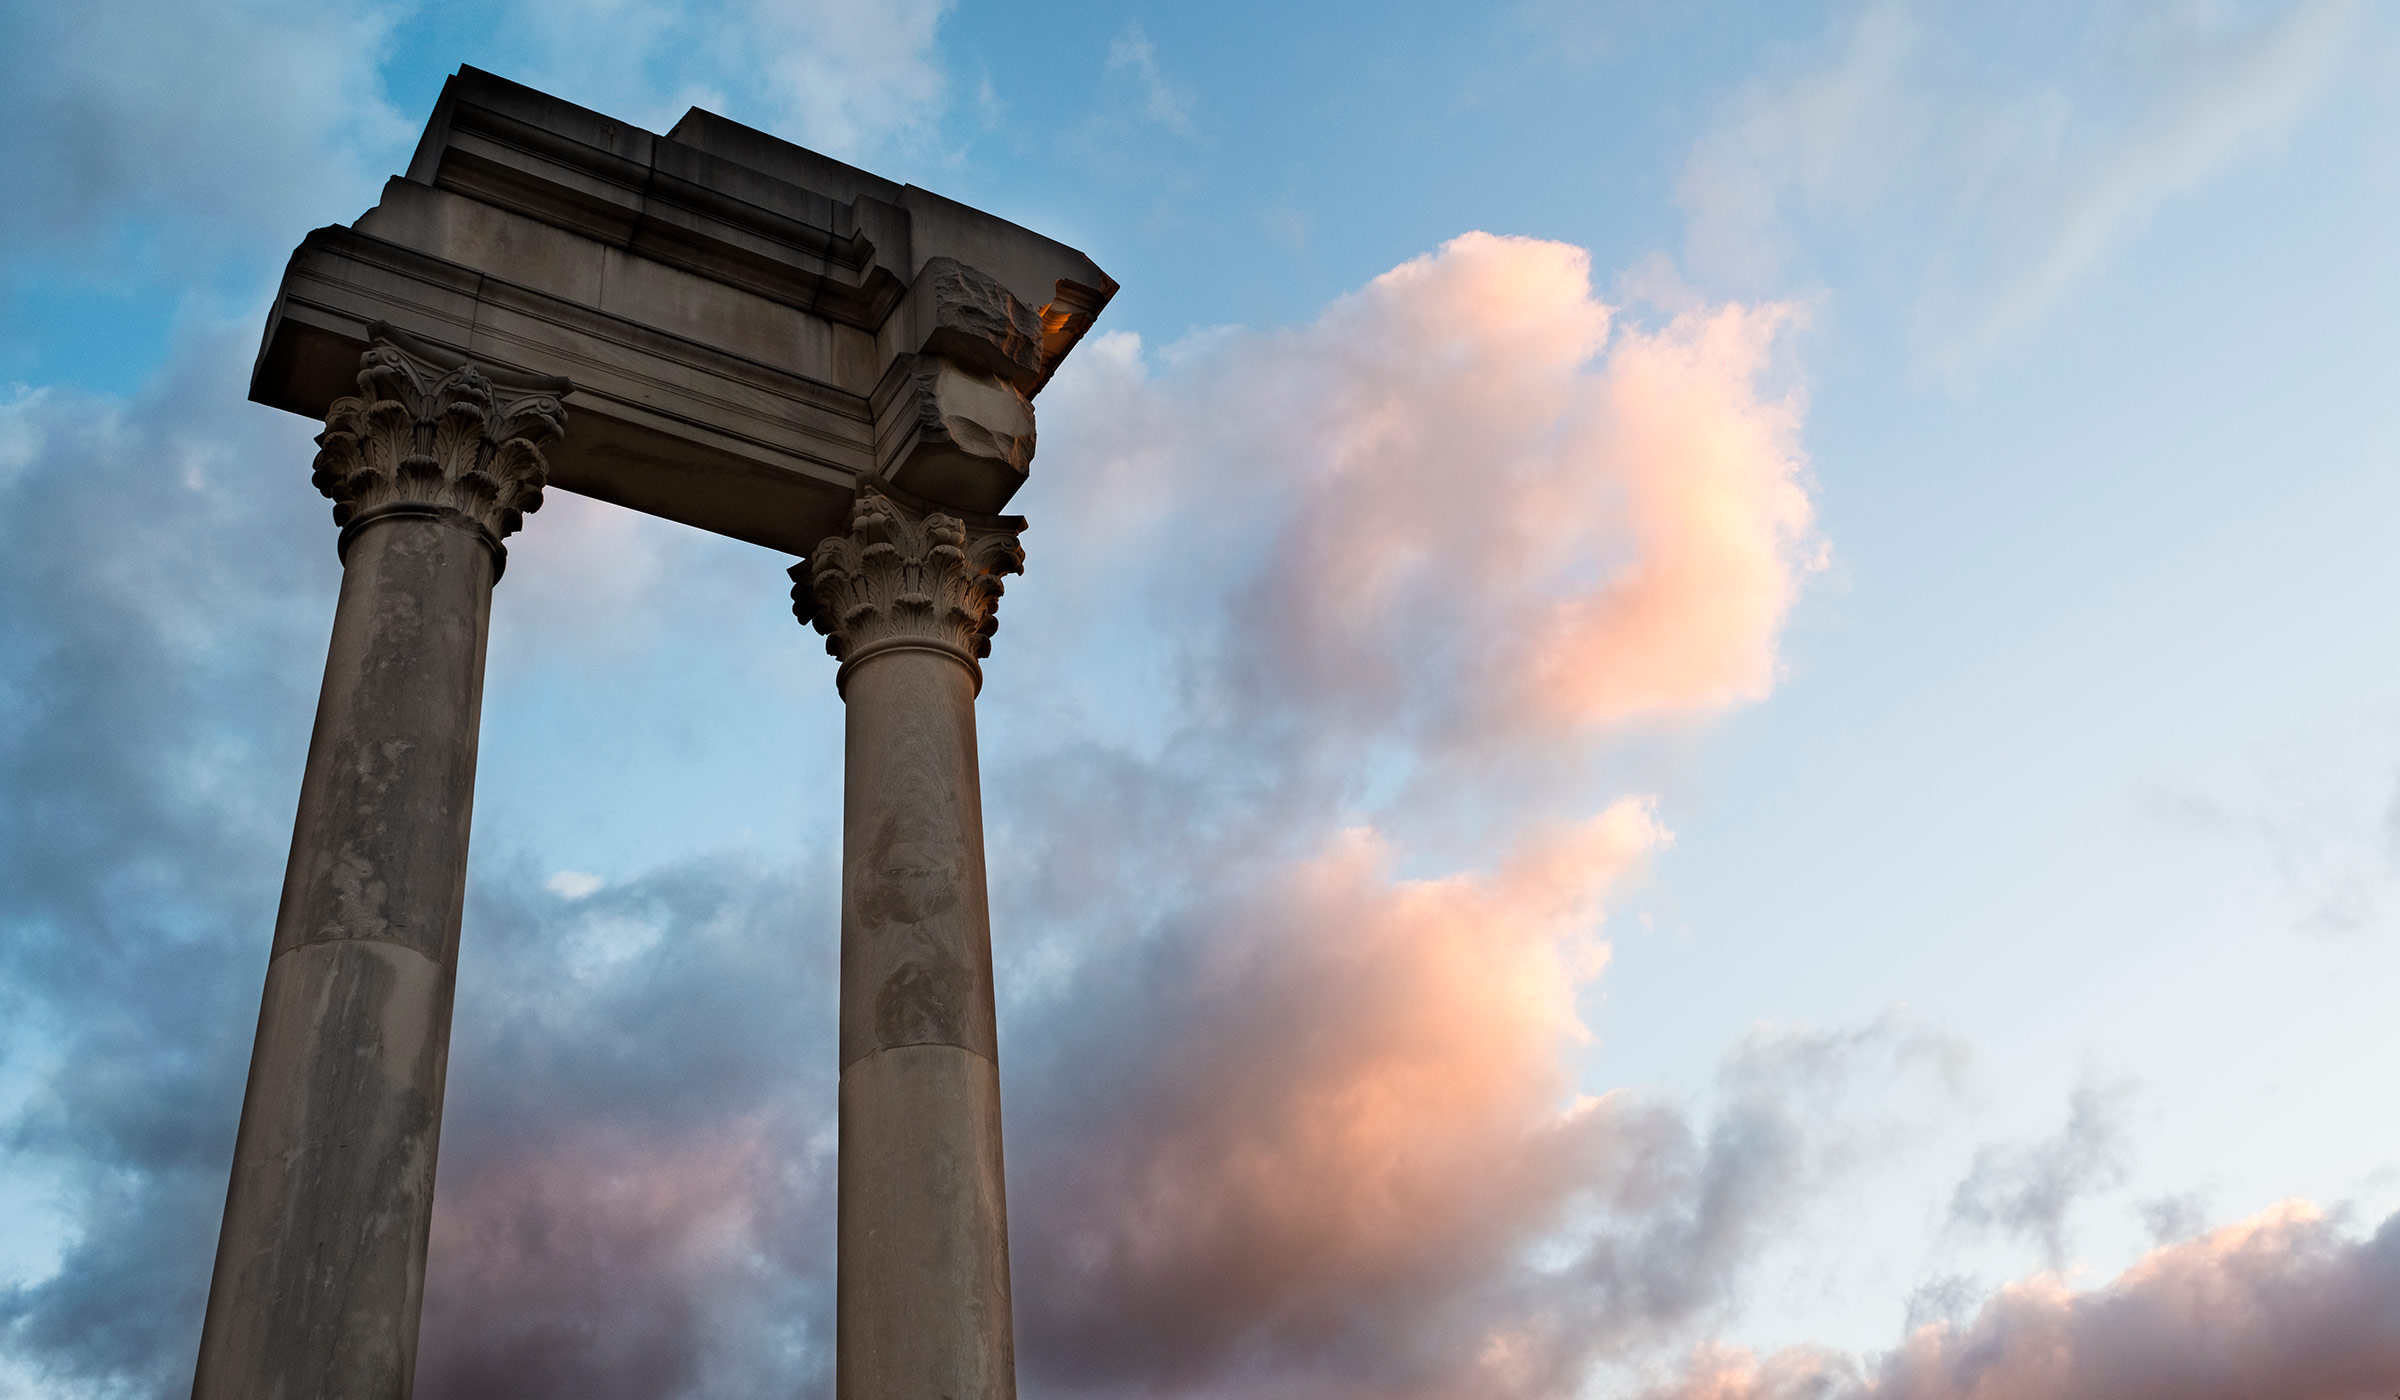 Set of Corinthian columns with clouds showing sunrise colors in background